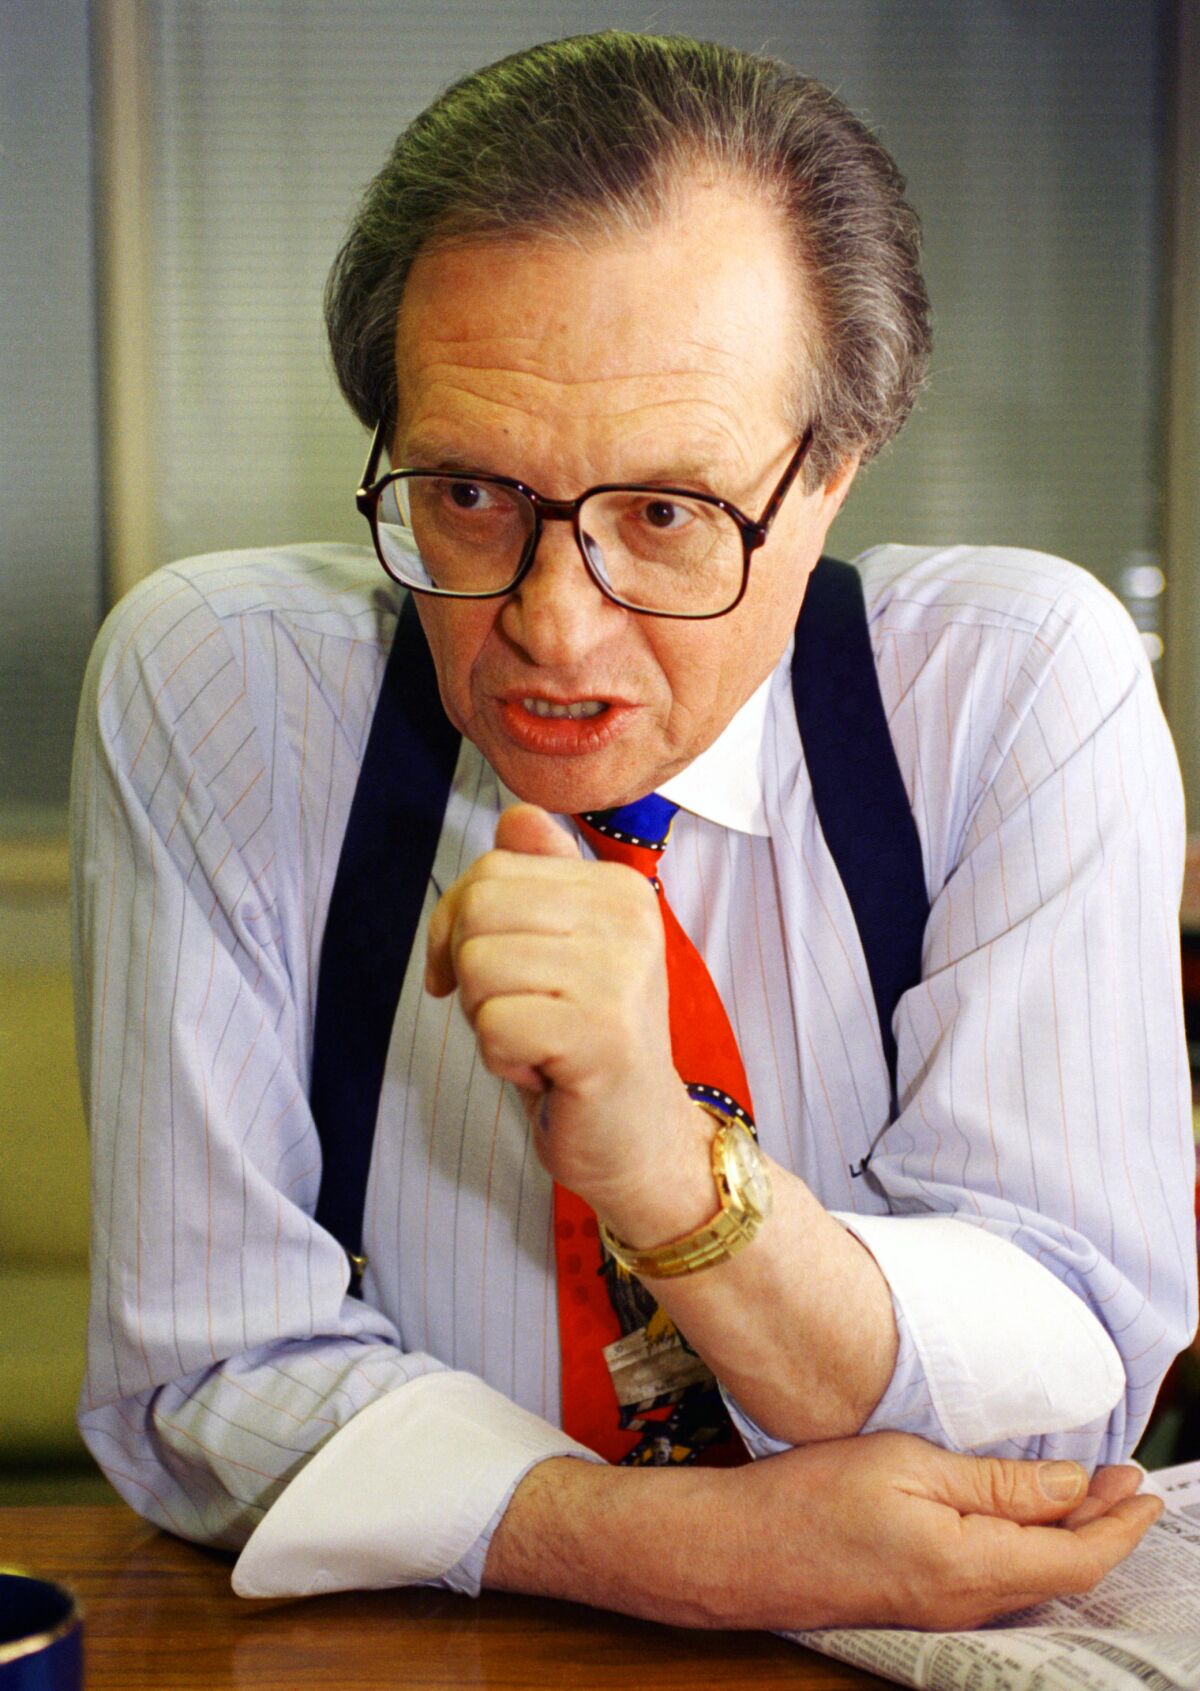 Larry King during an interview at the CNN studio.